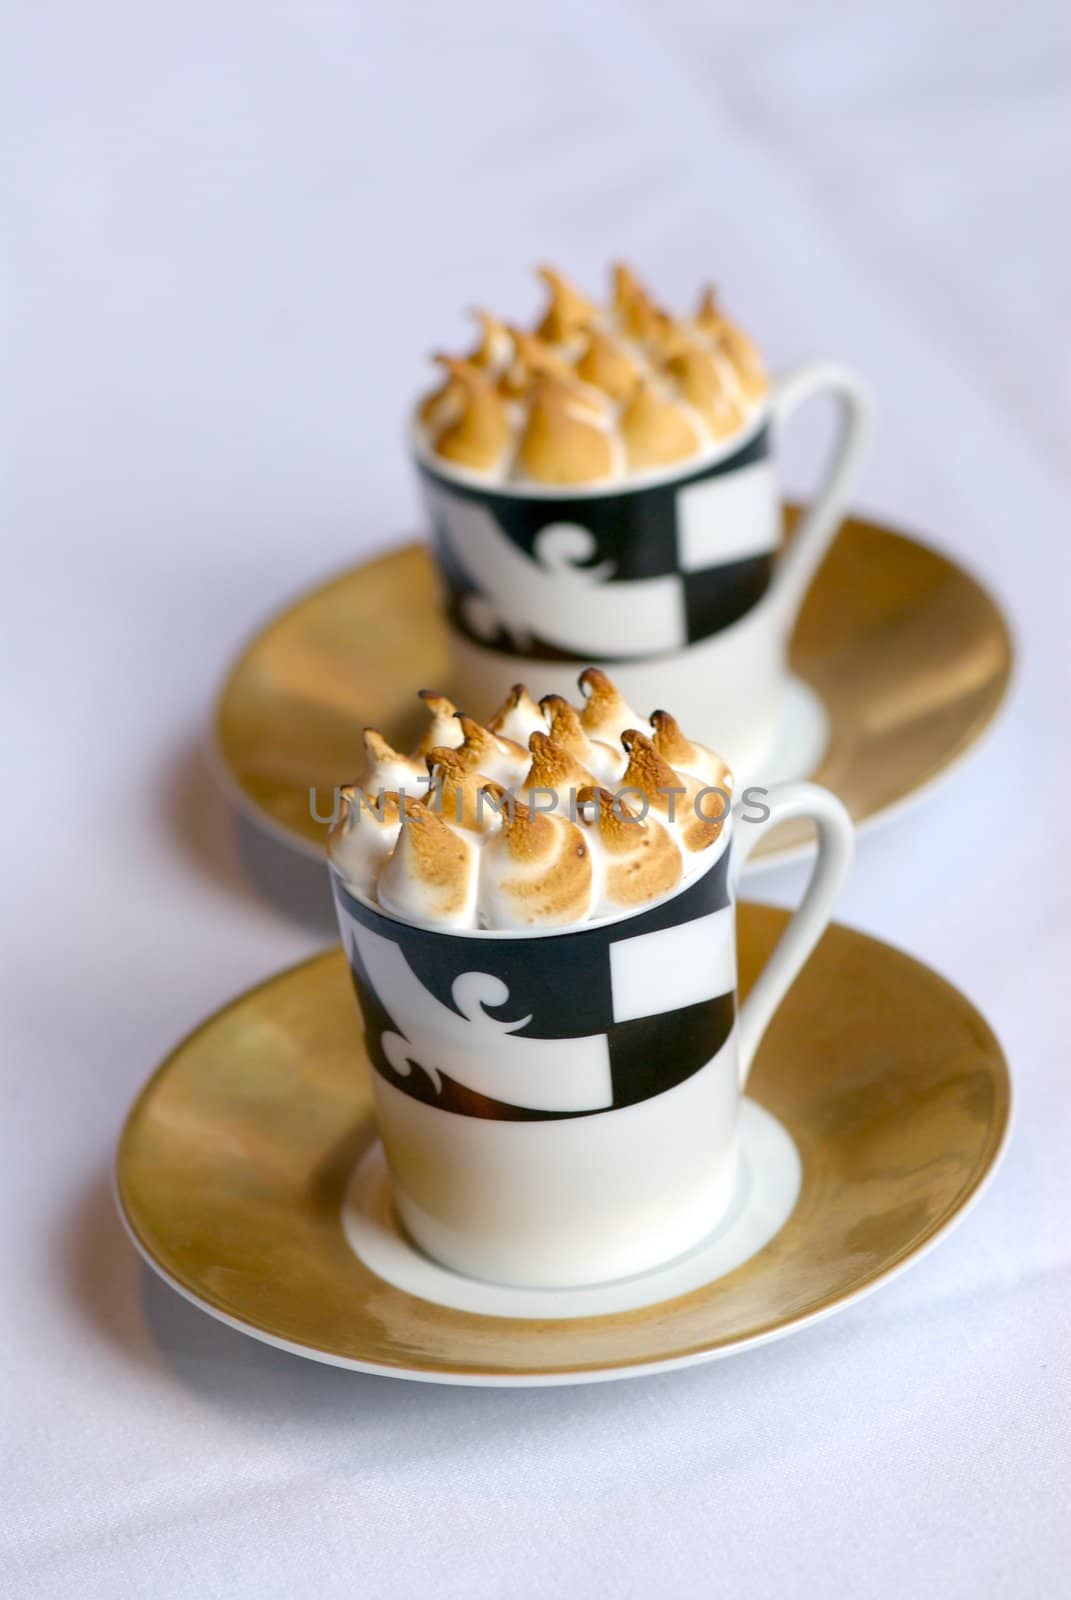 Image of mugs of cappaccino on saucers